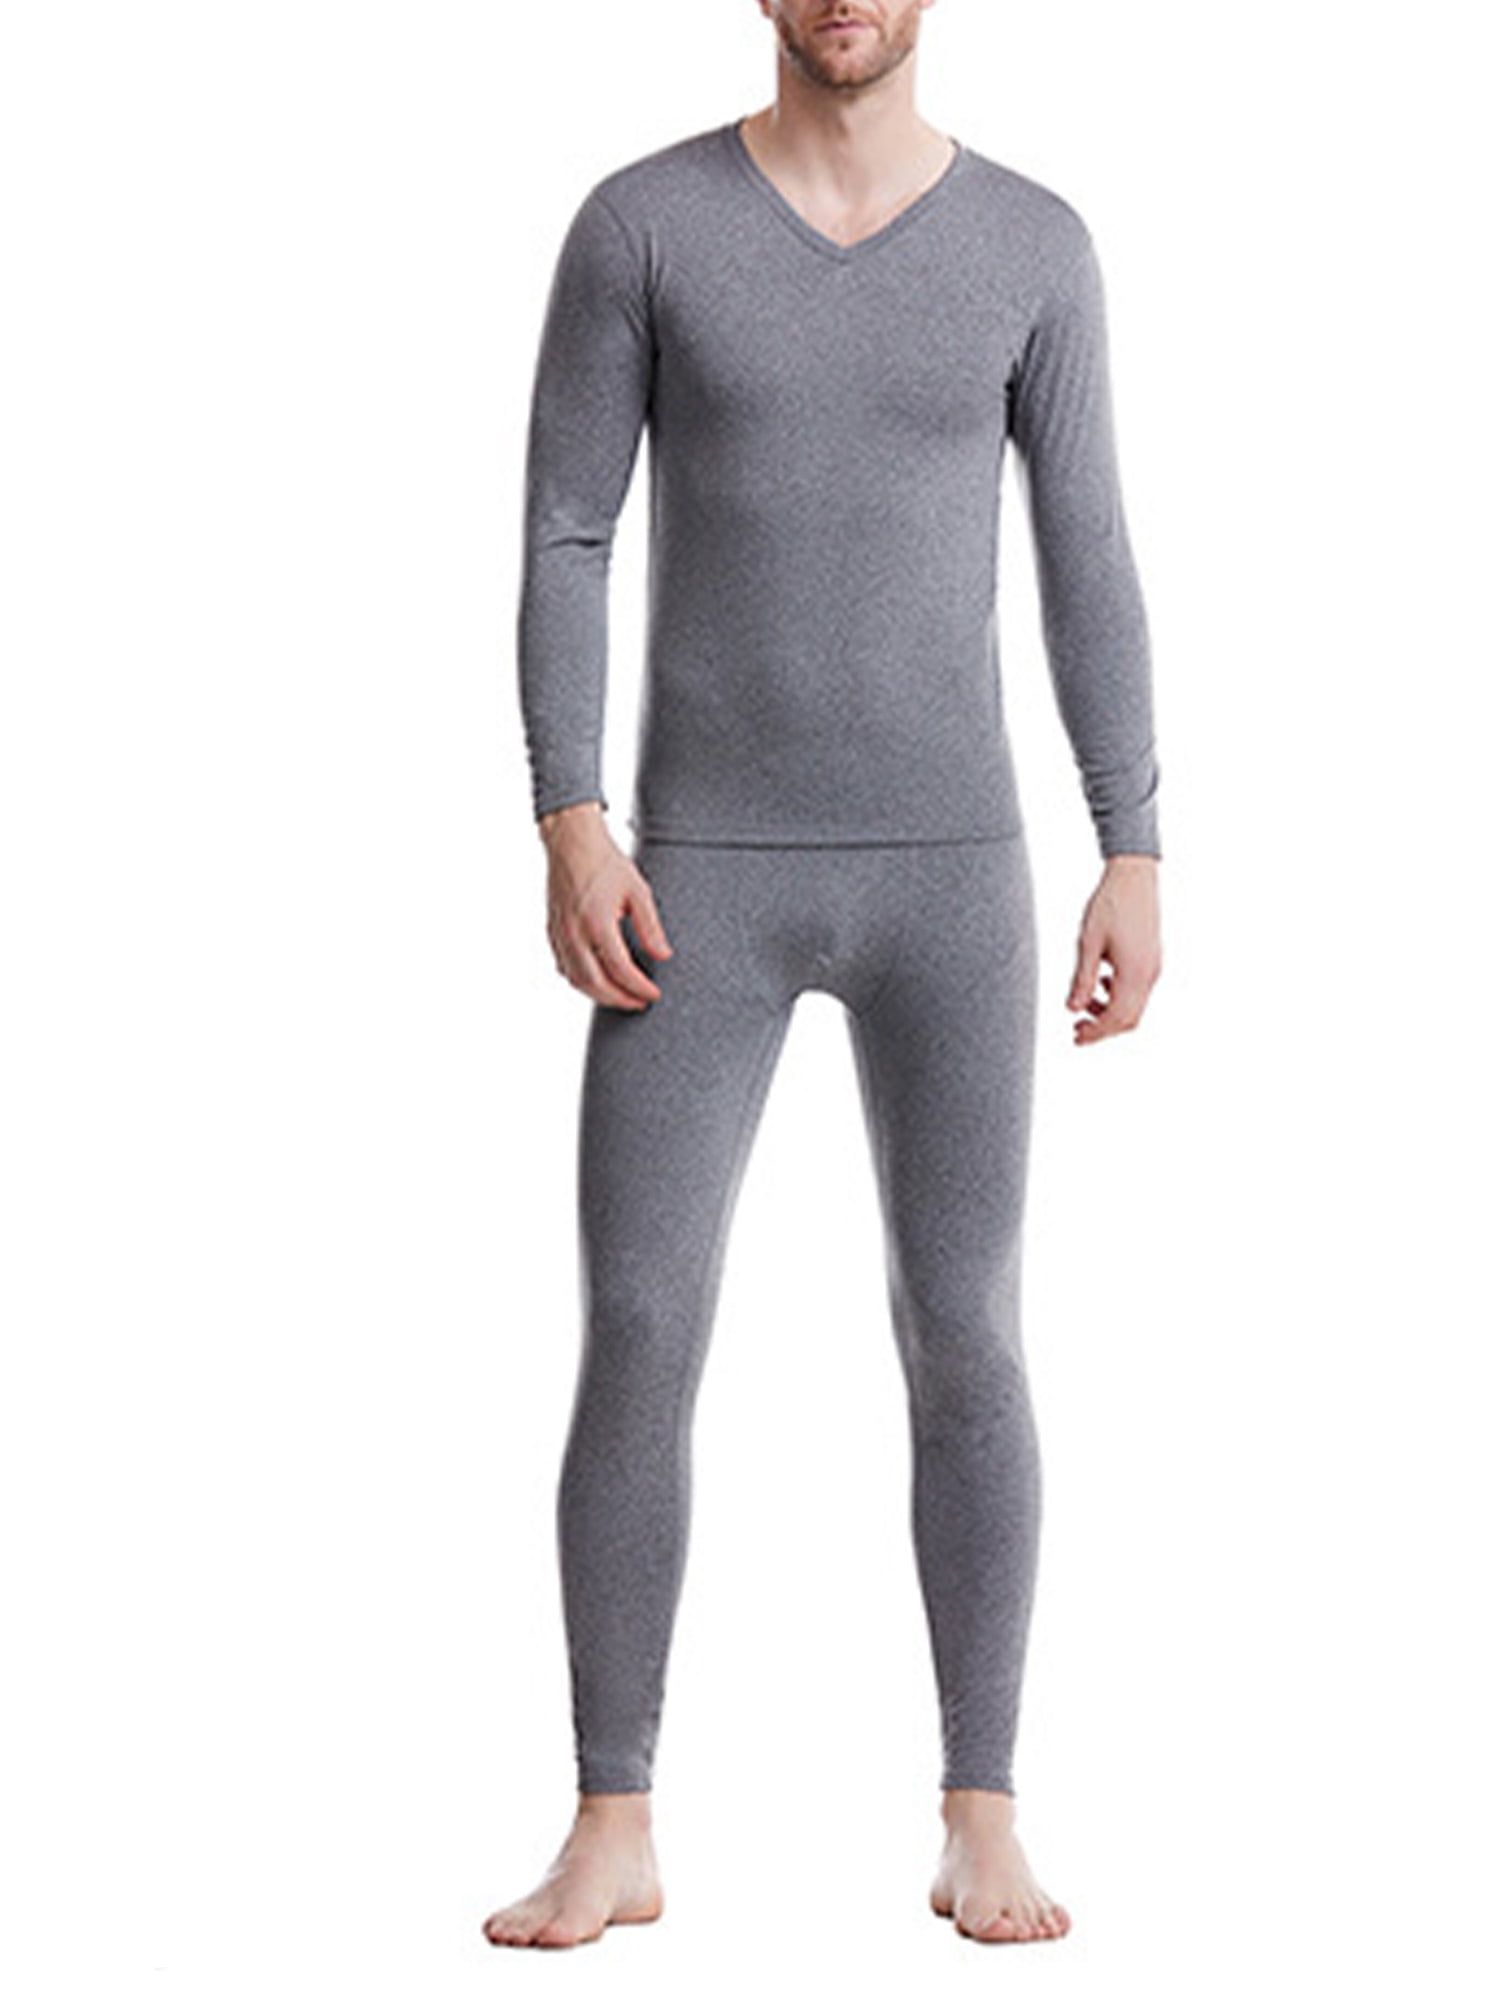 Mens Thermal Long Johns Top Bottom Cotton Underwear Warm Base layer Trousers 